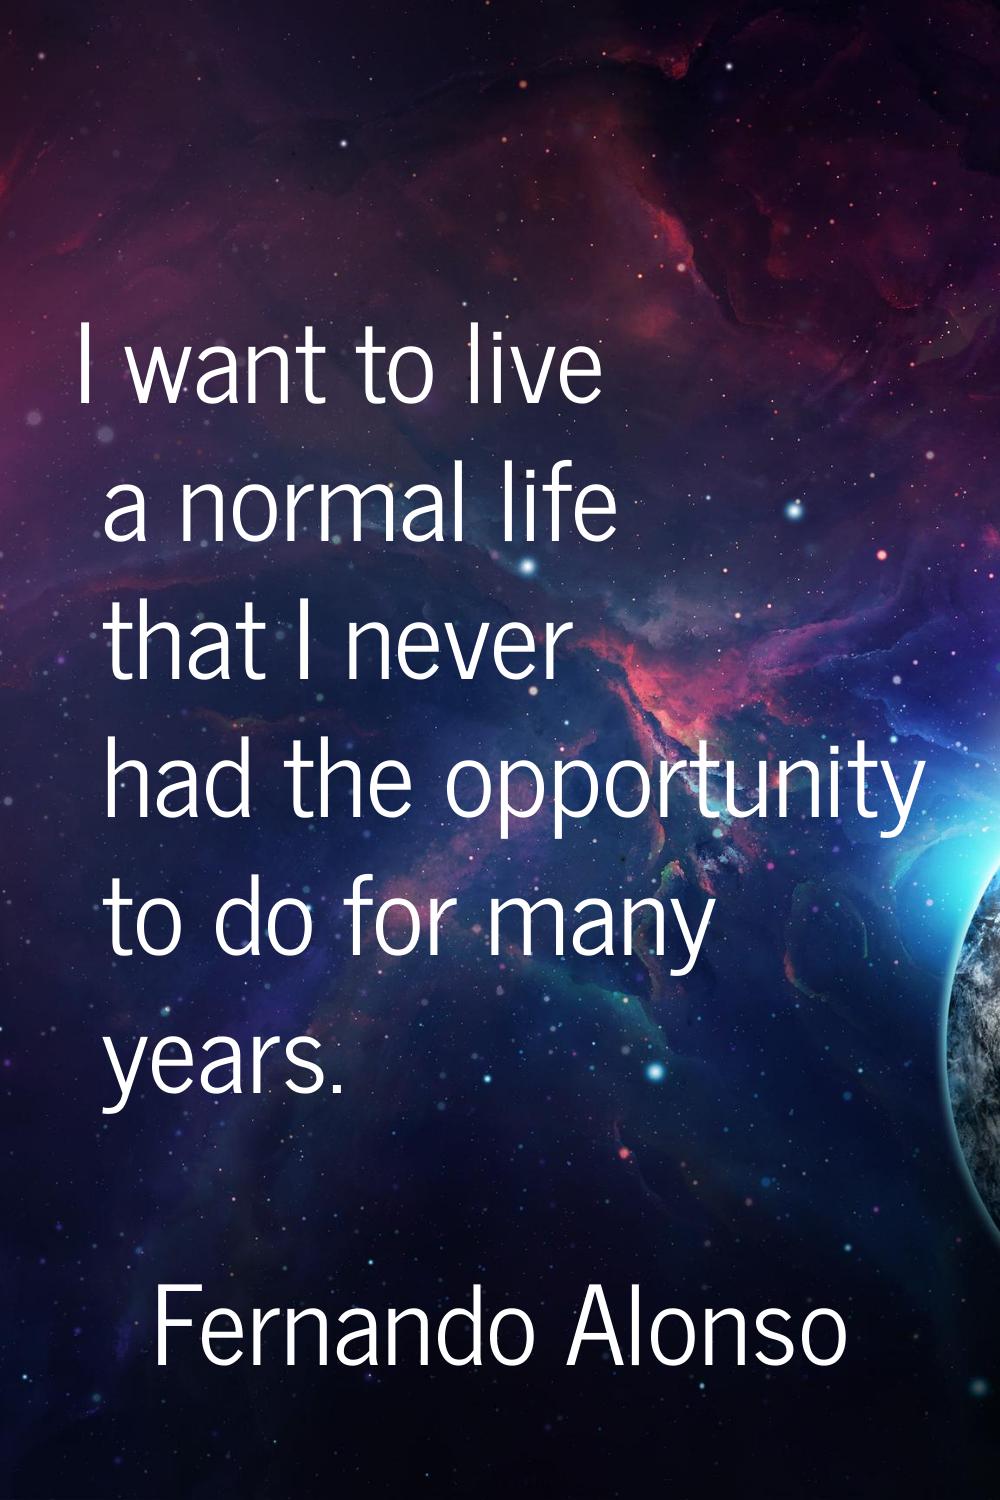 I want to live a normal life that I never had the opportunity to do for many years.